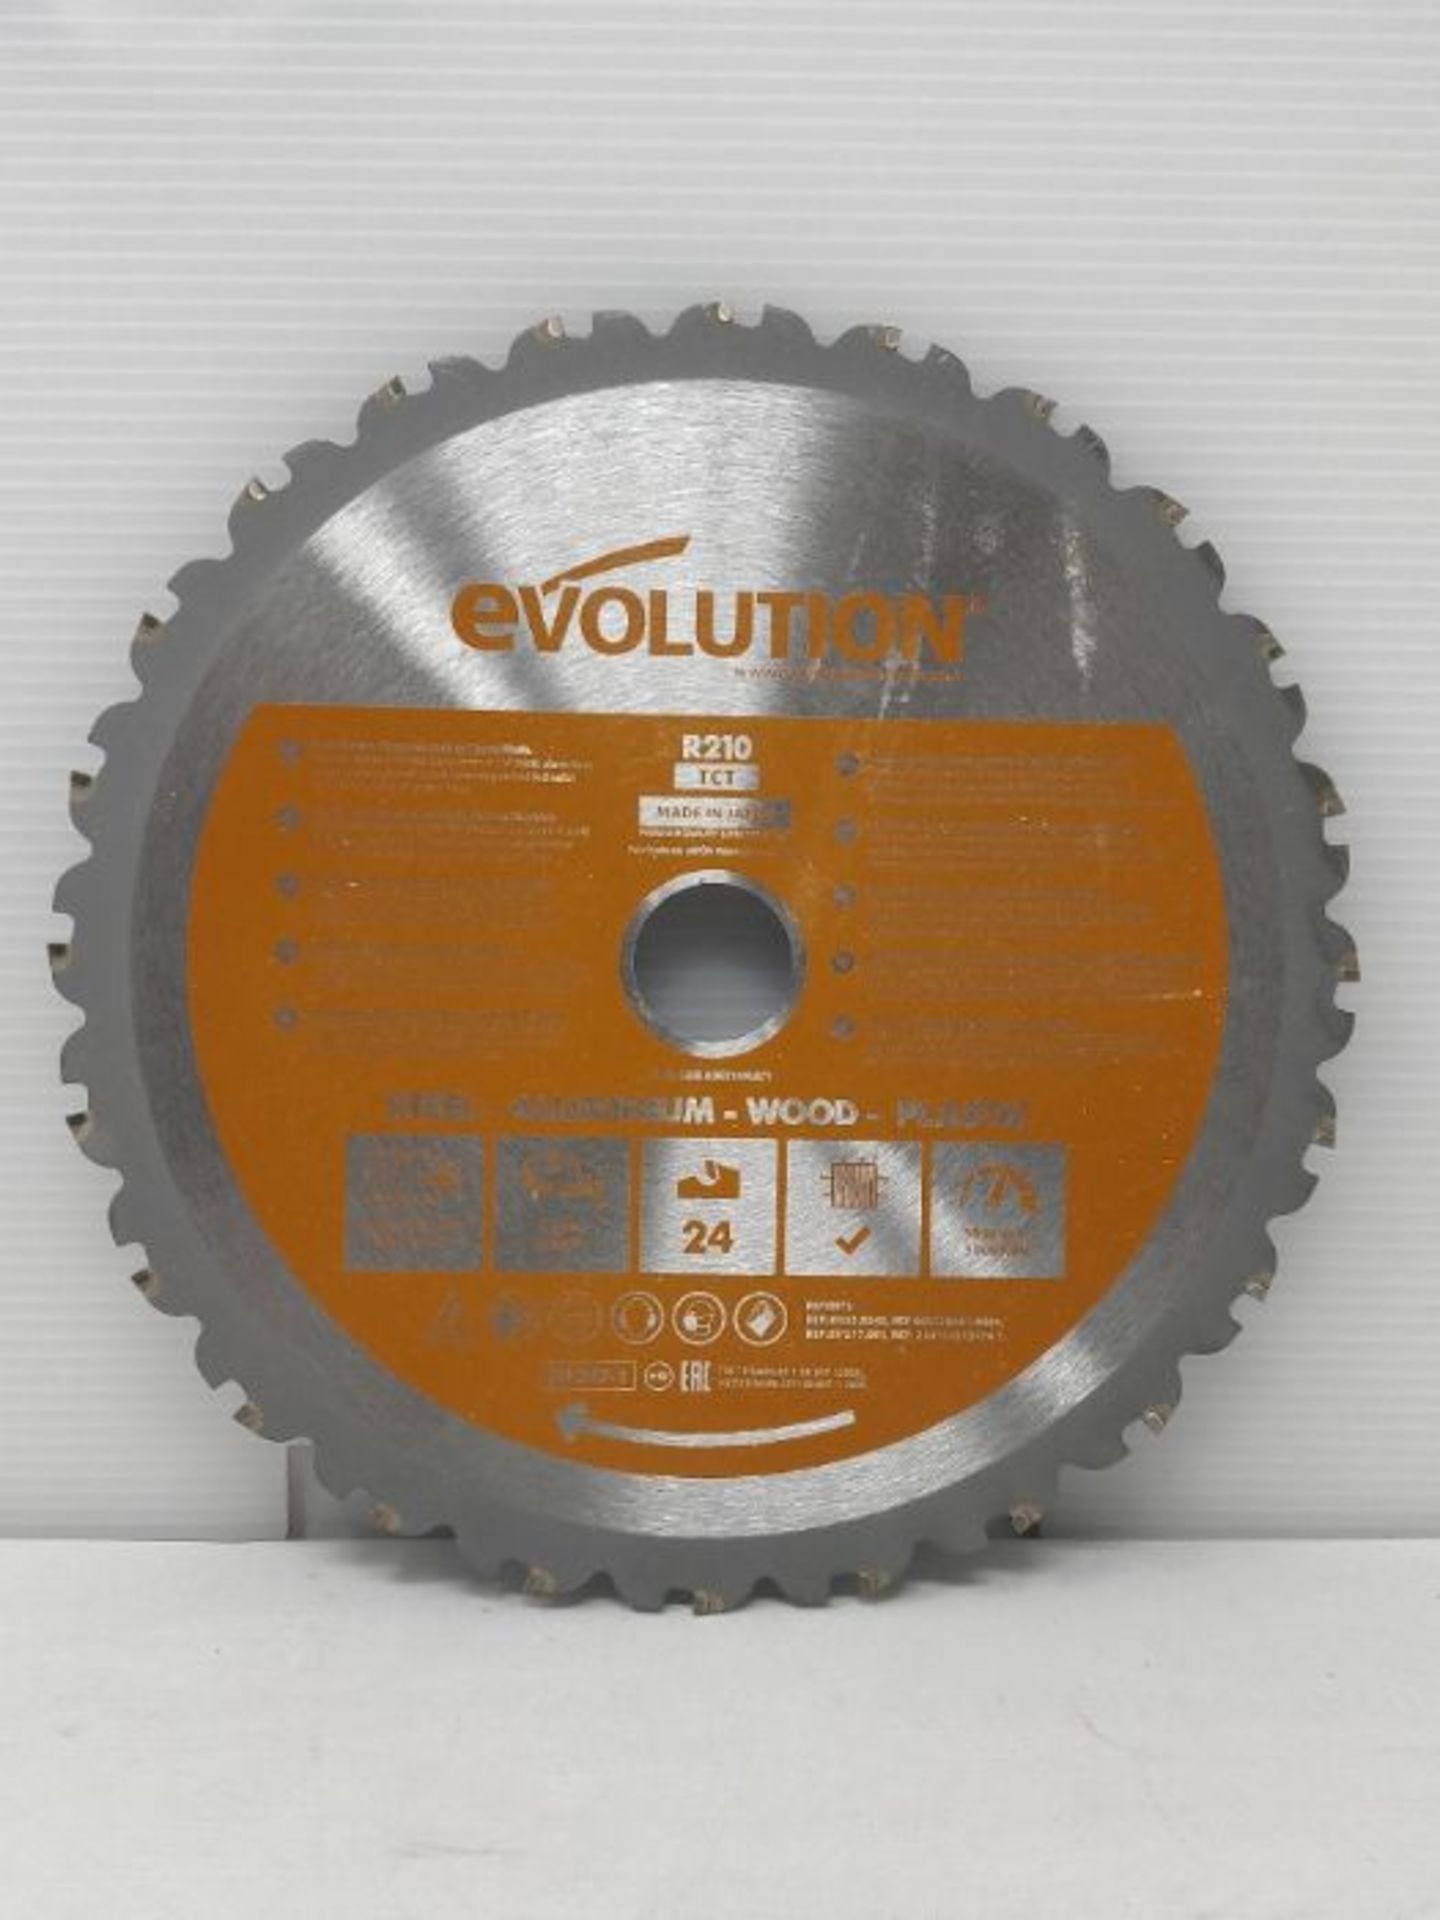 Evolution Power Tools R210TCT-24T (Rage) Multi-Material TCT Blade Cuts Wood, Metal and - Image 2 of 2